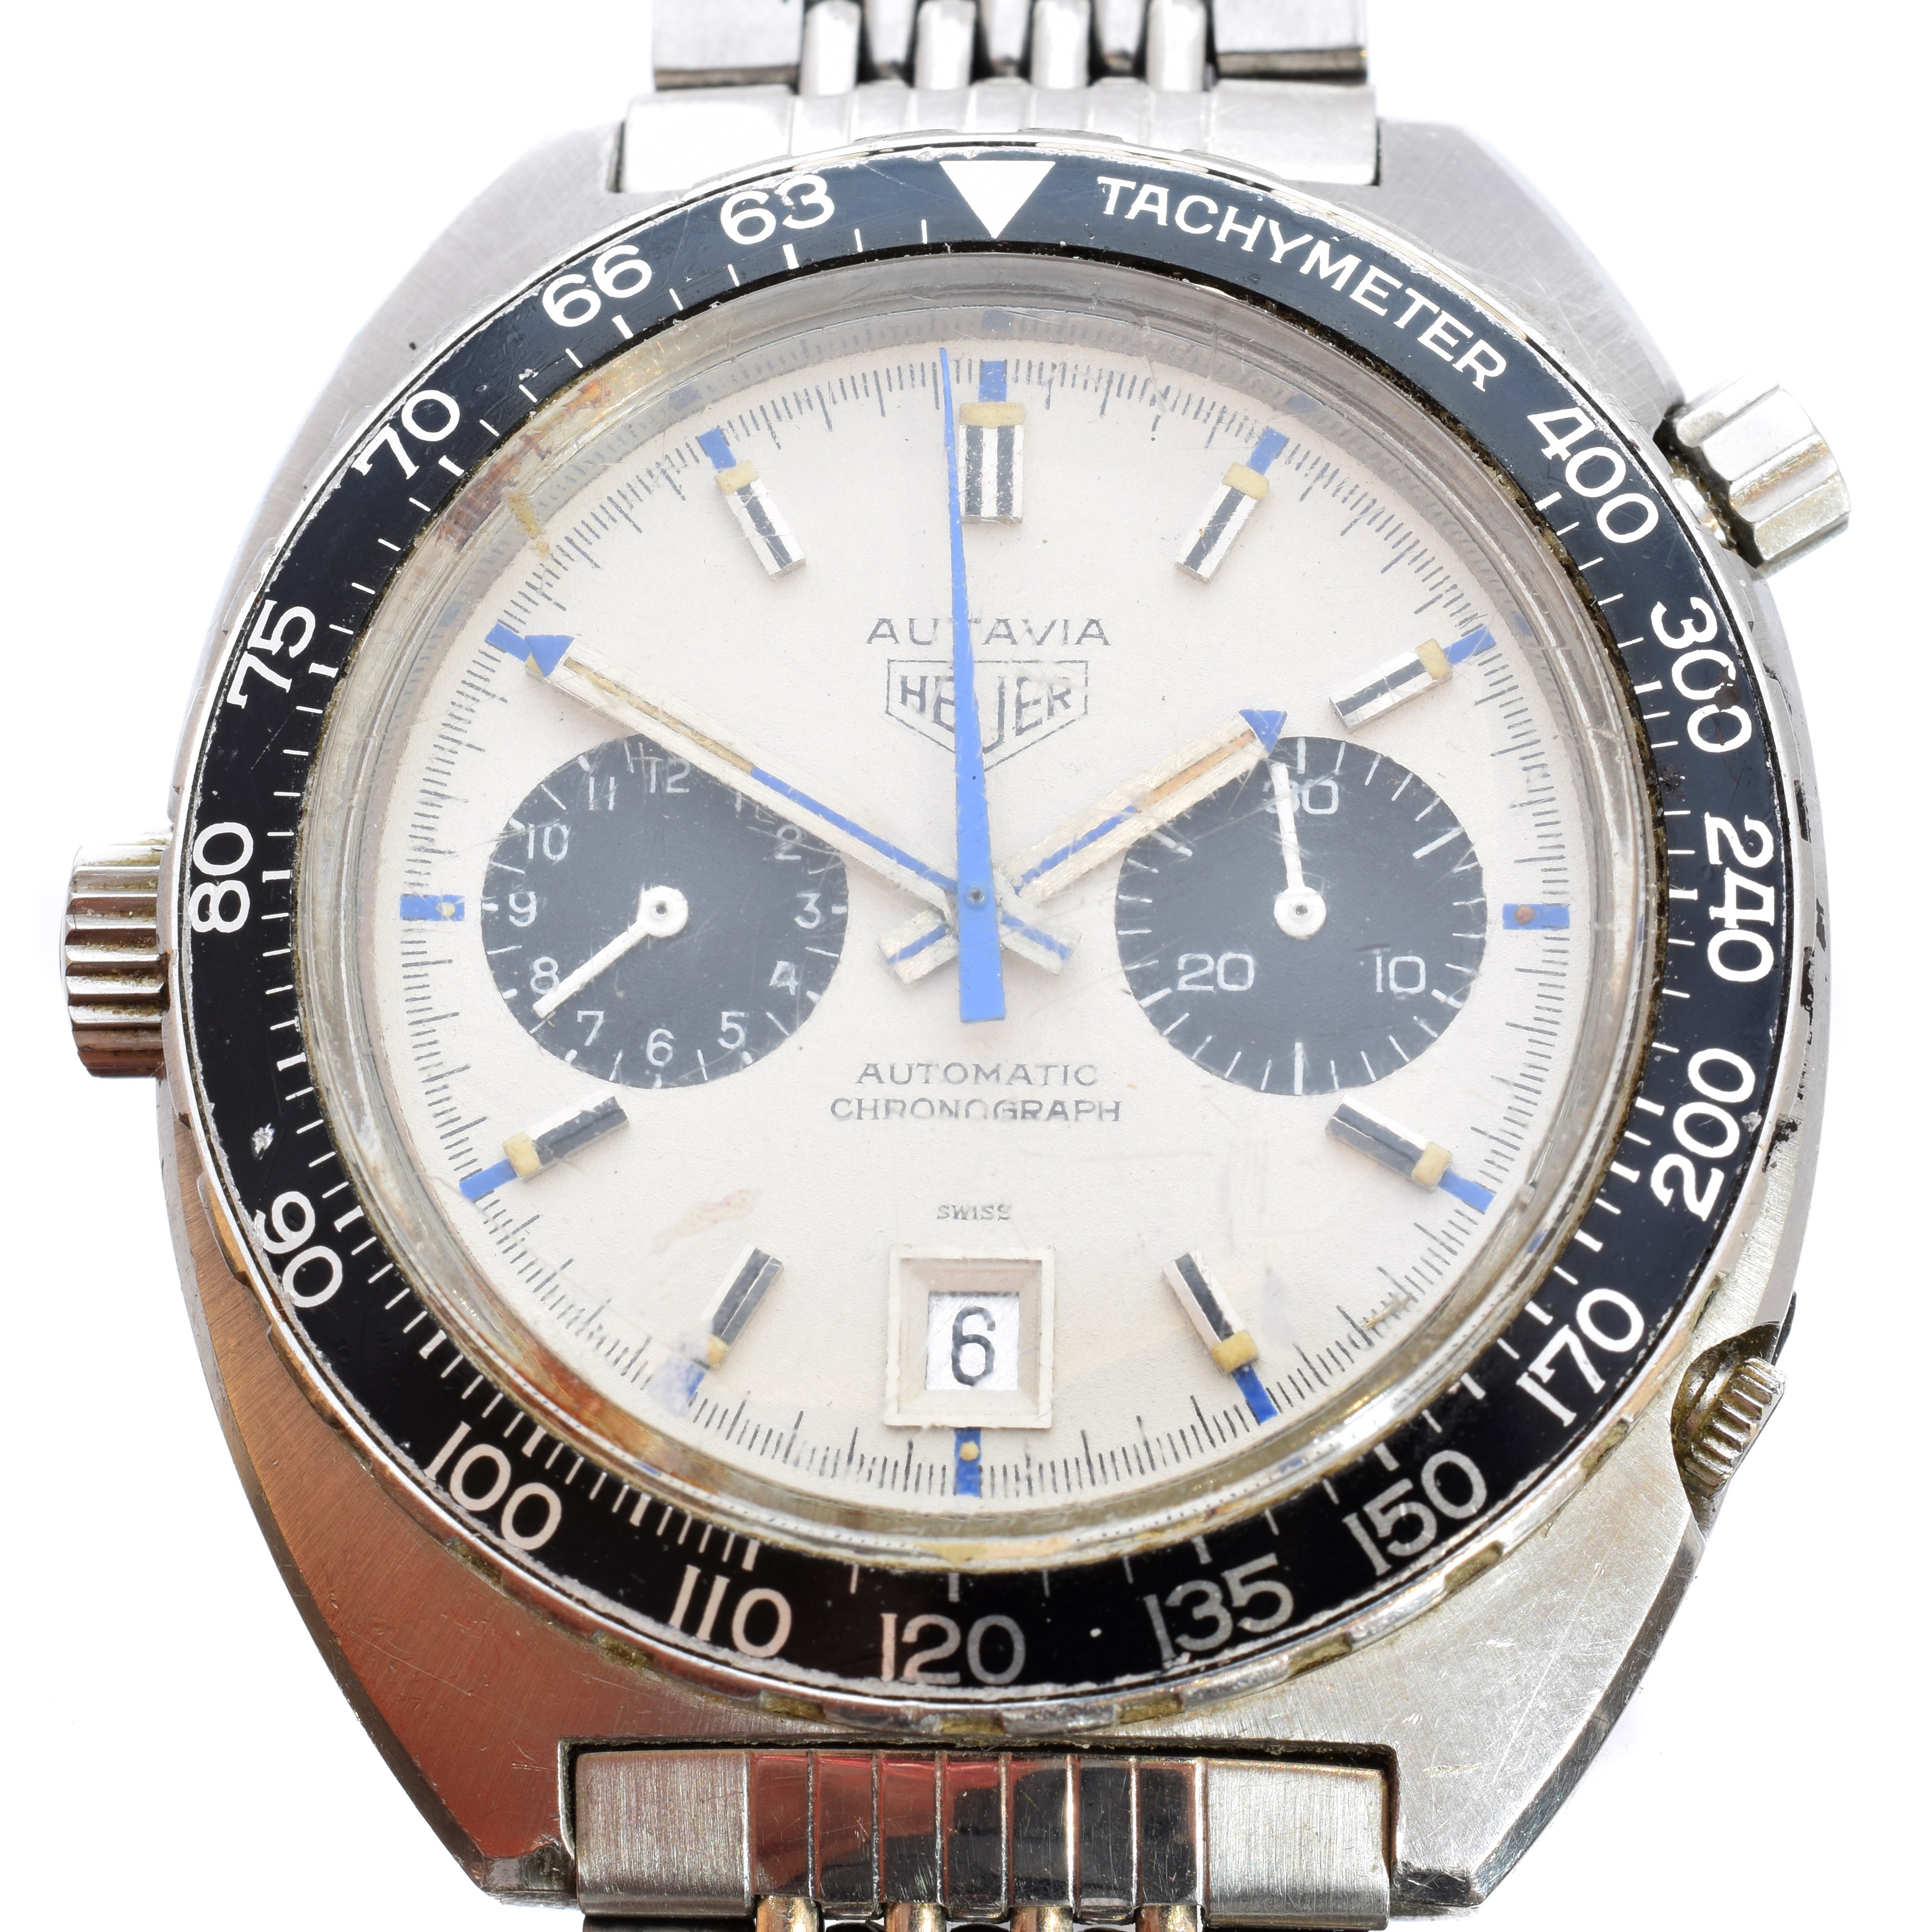 Heuer Watches Auction